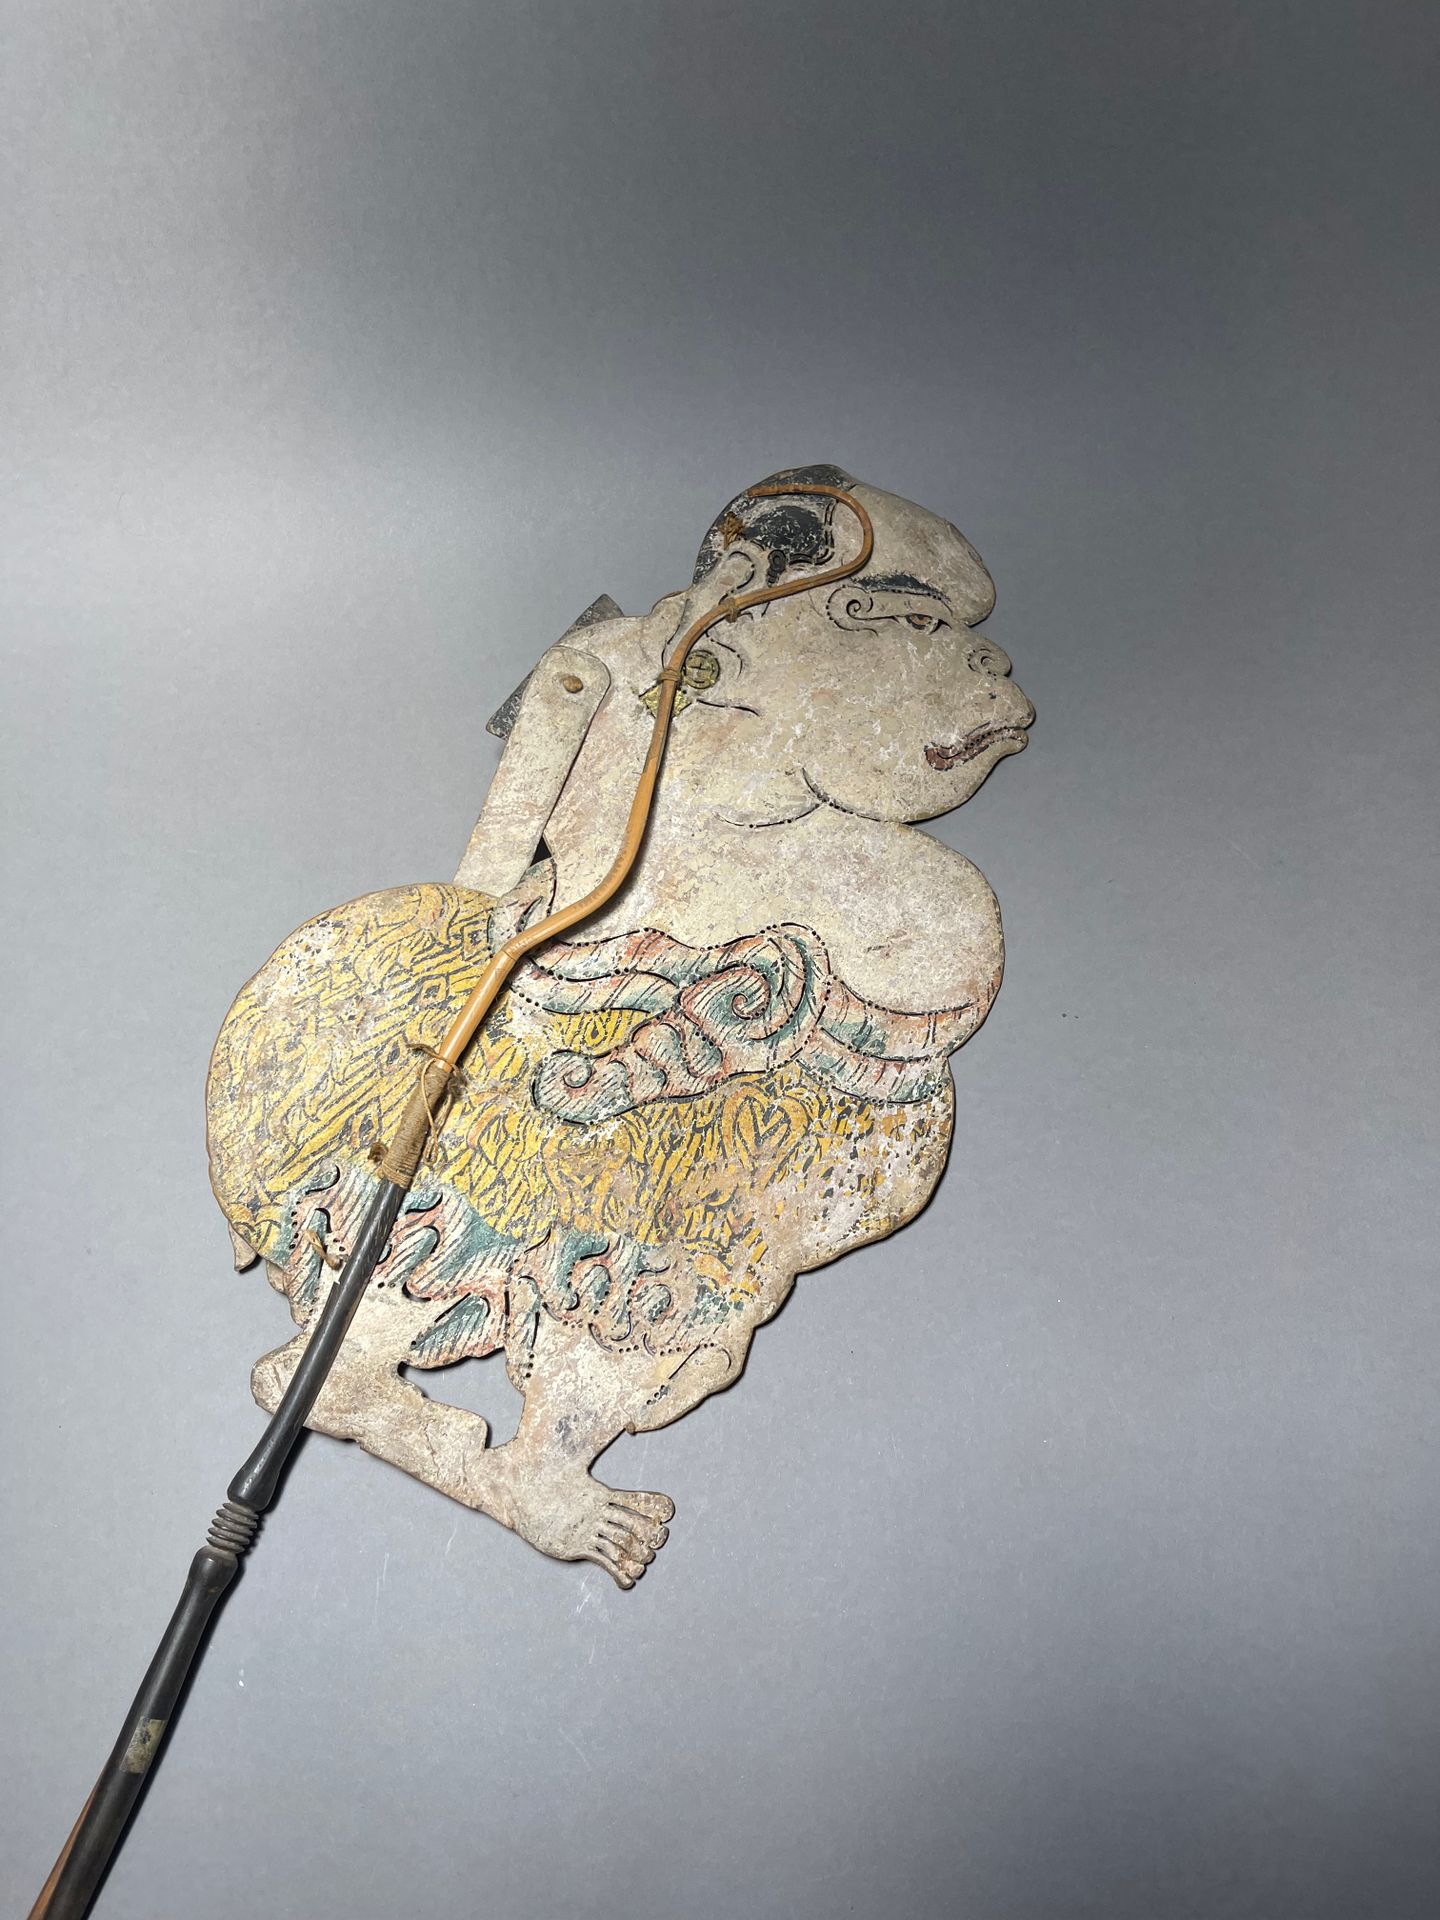 INDONESIE - XXe siècle Wayang kulit puppet (shadow theatre) in polychrome leathe&hellip;